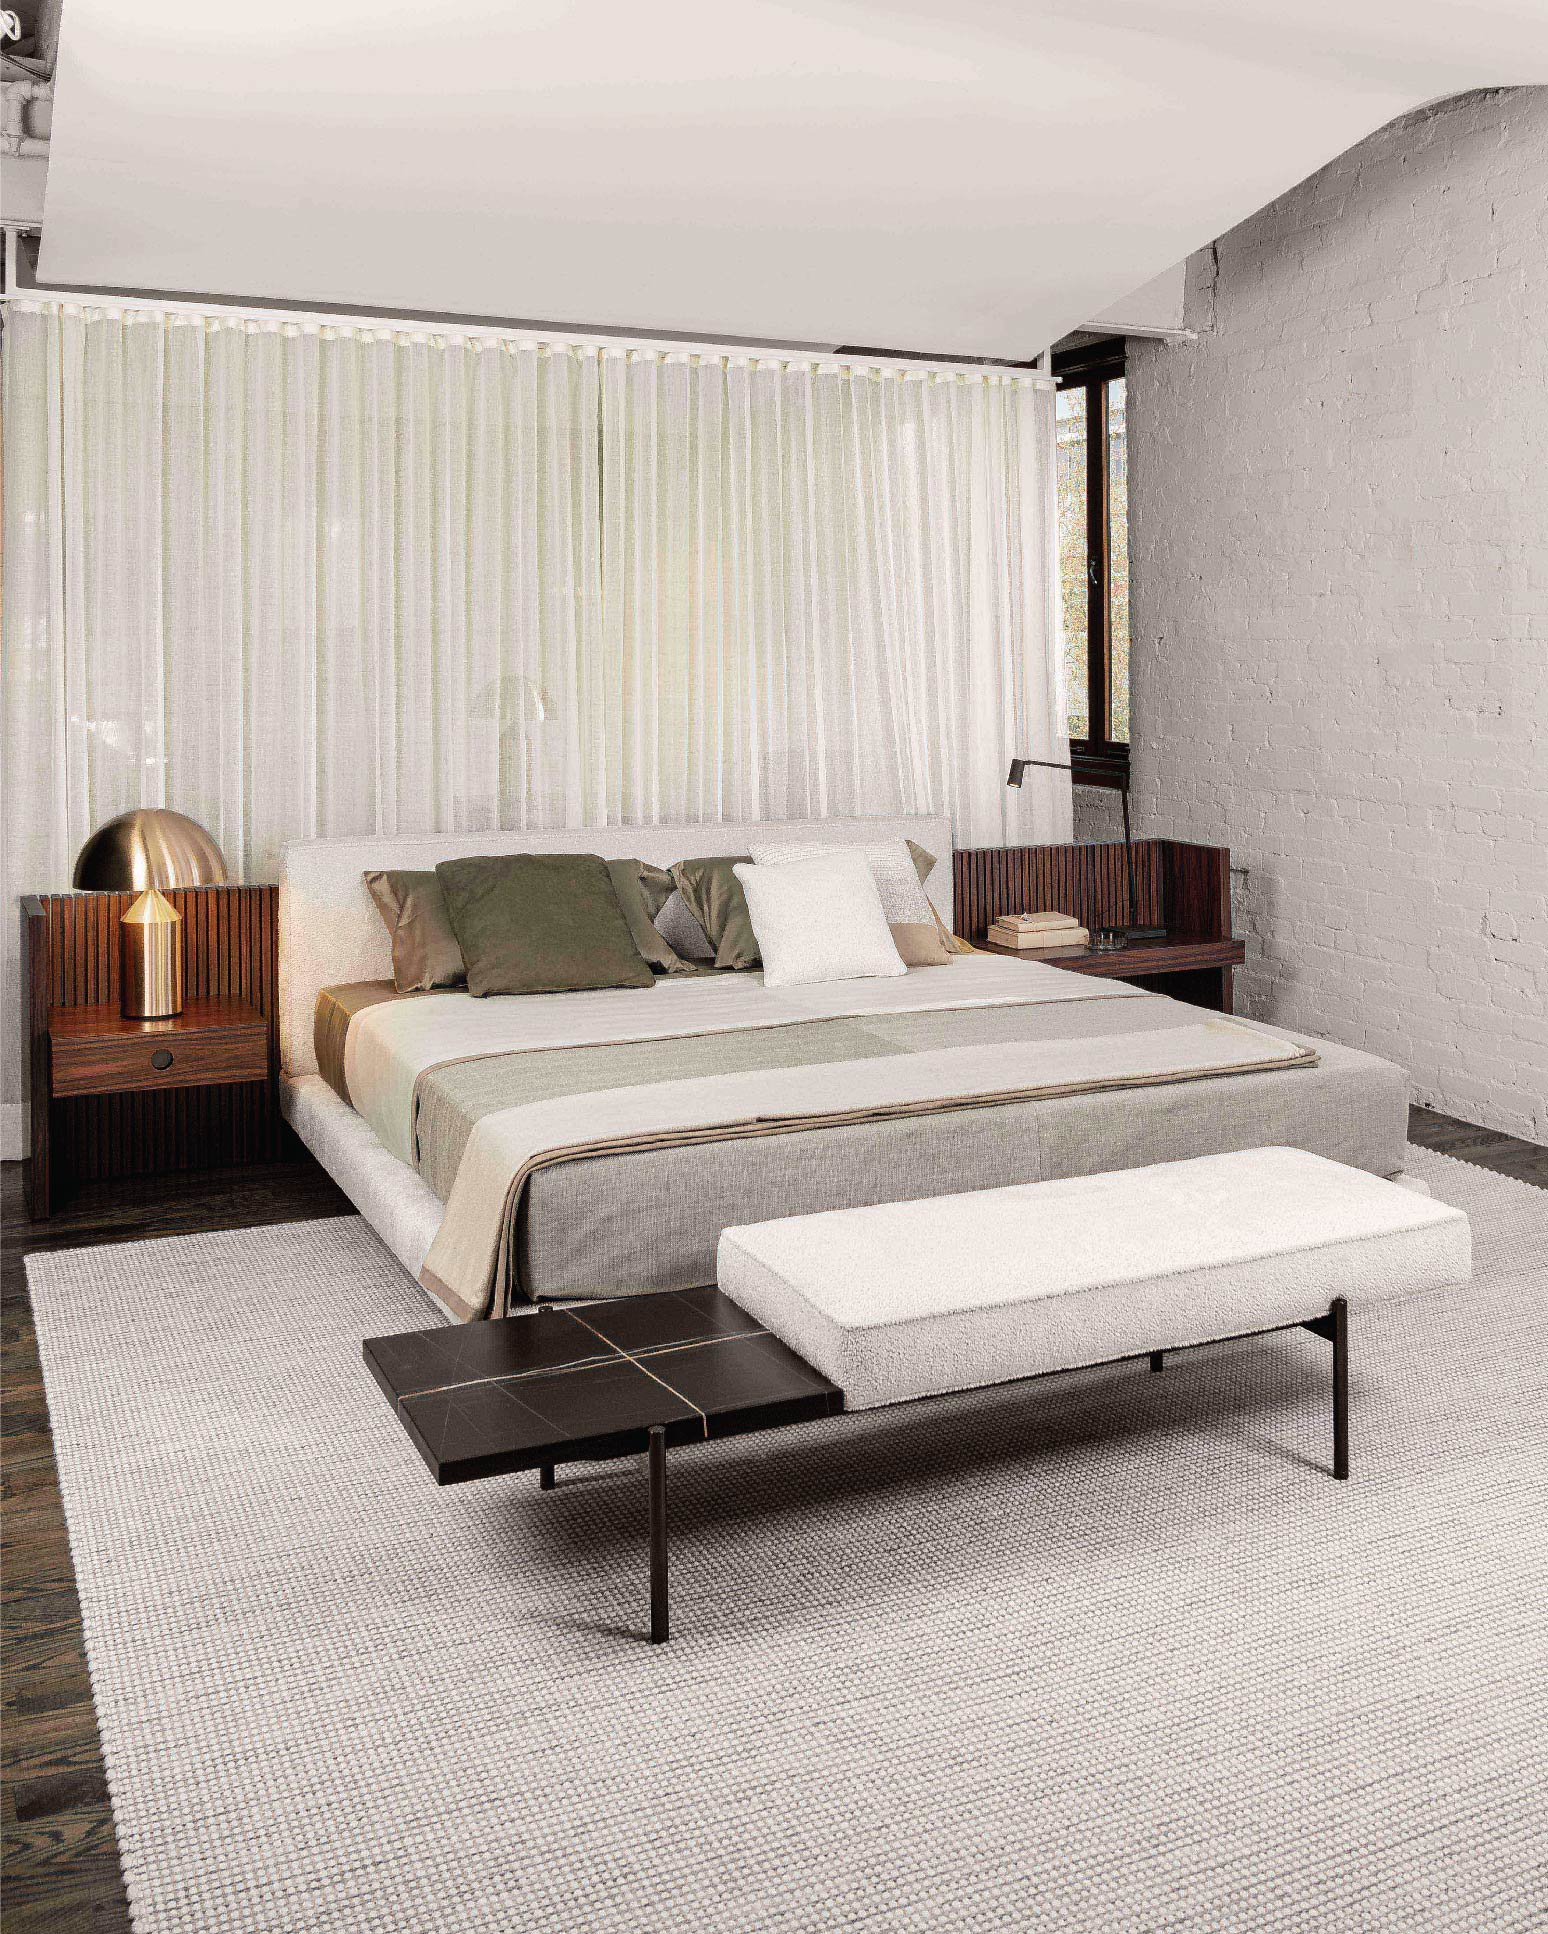 Brasilia bed designed by Marcio Kogan / studio mk27 – Minotti’s first bed to highlight wooden elements, featuring a large Palisander Santos headboard around a luxurious plush base.